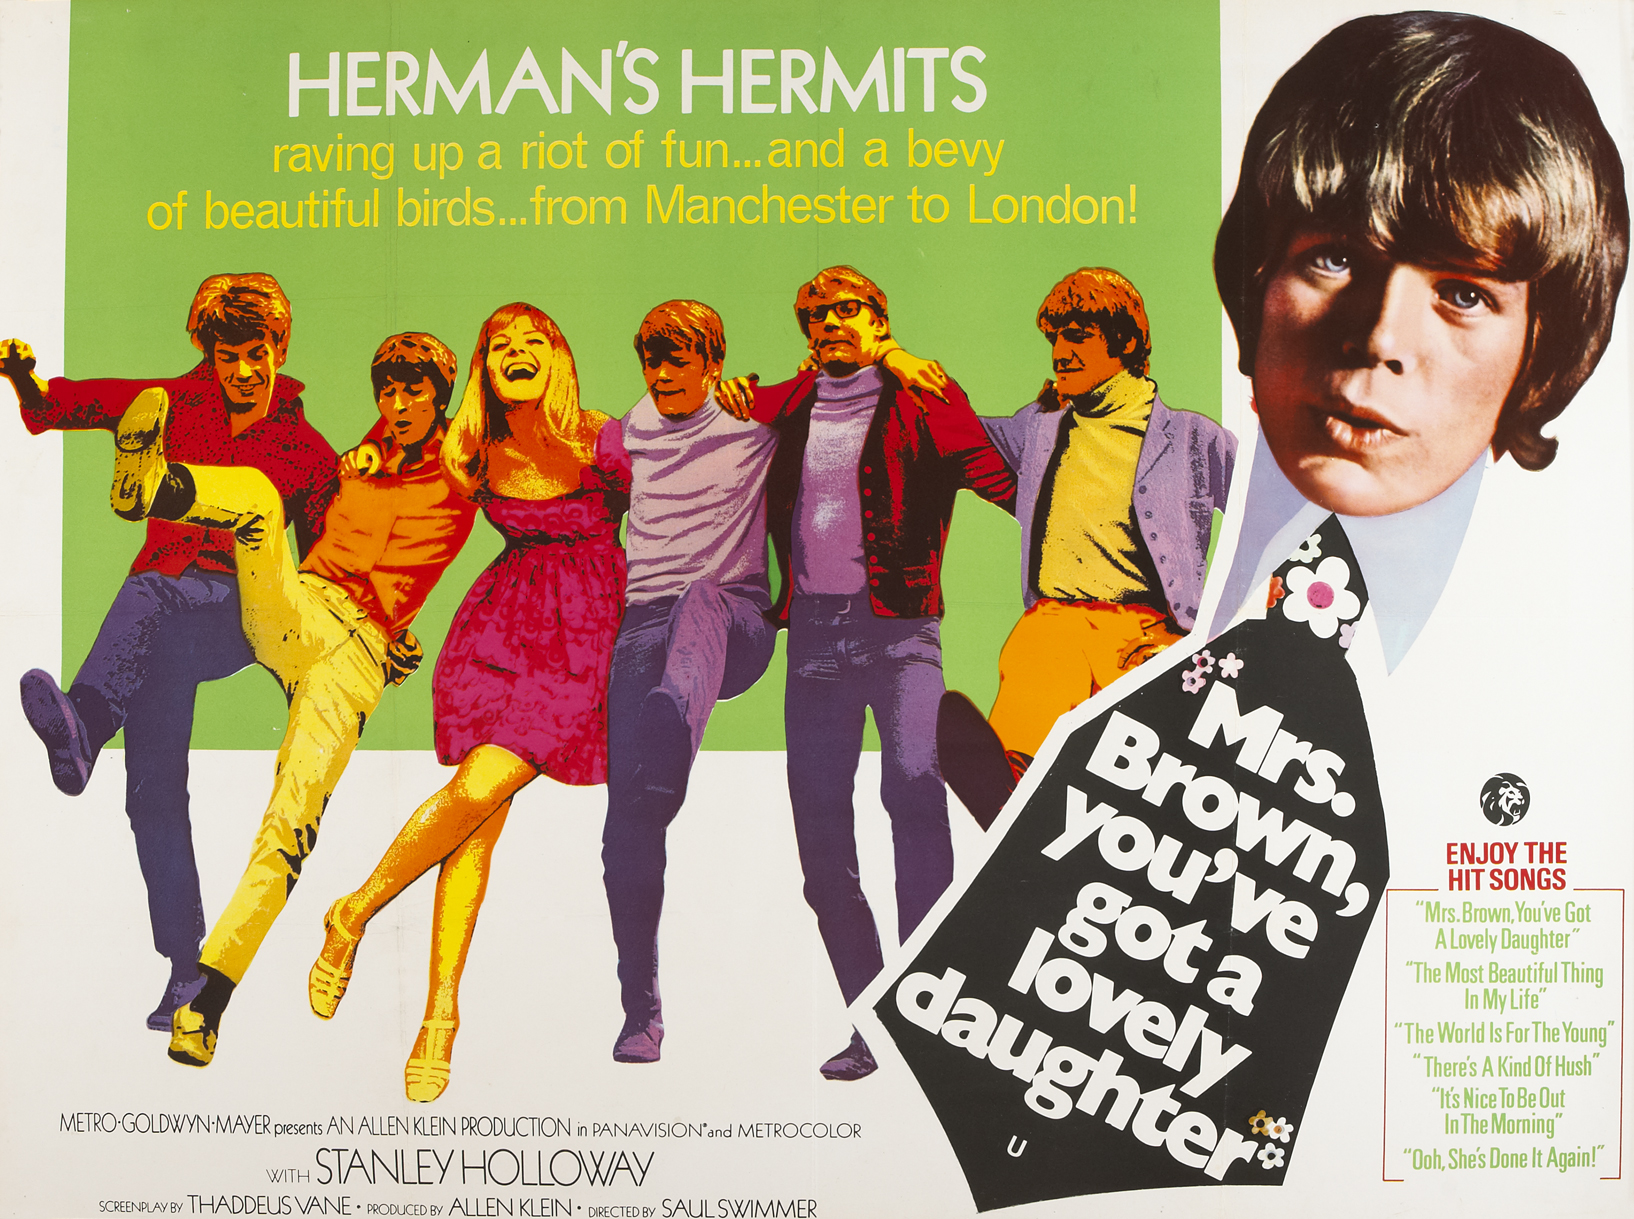 Herman's Hermits: Mrs. Brown, You've Got a Lovely Daughter Metro-Goldwyn-Mayer 1968 promotional poster at Whyte's Auctions